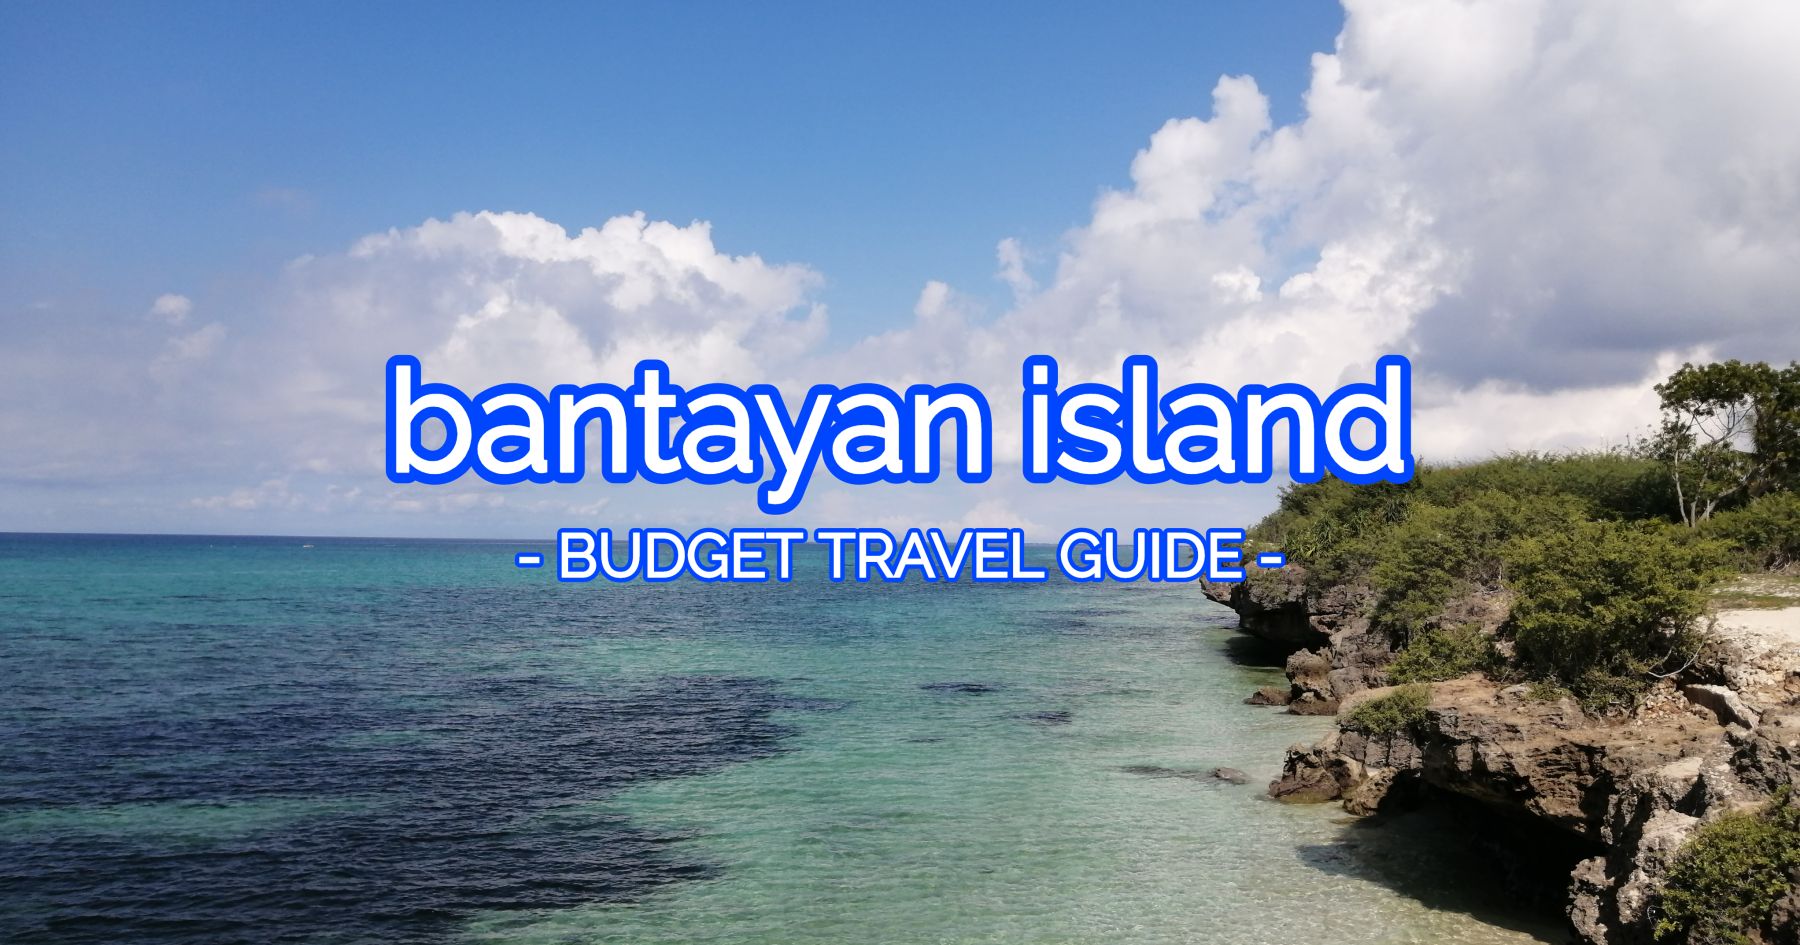 Bantayan Island Travel Guide: Places To Visit + Budget & Tips